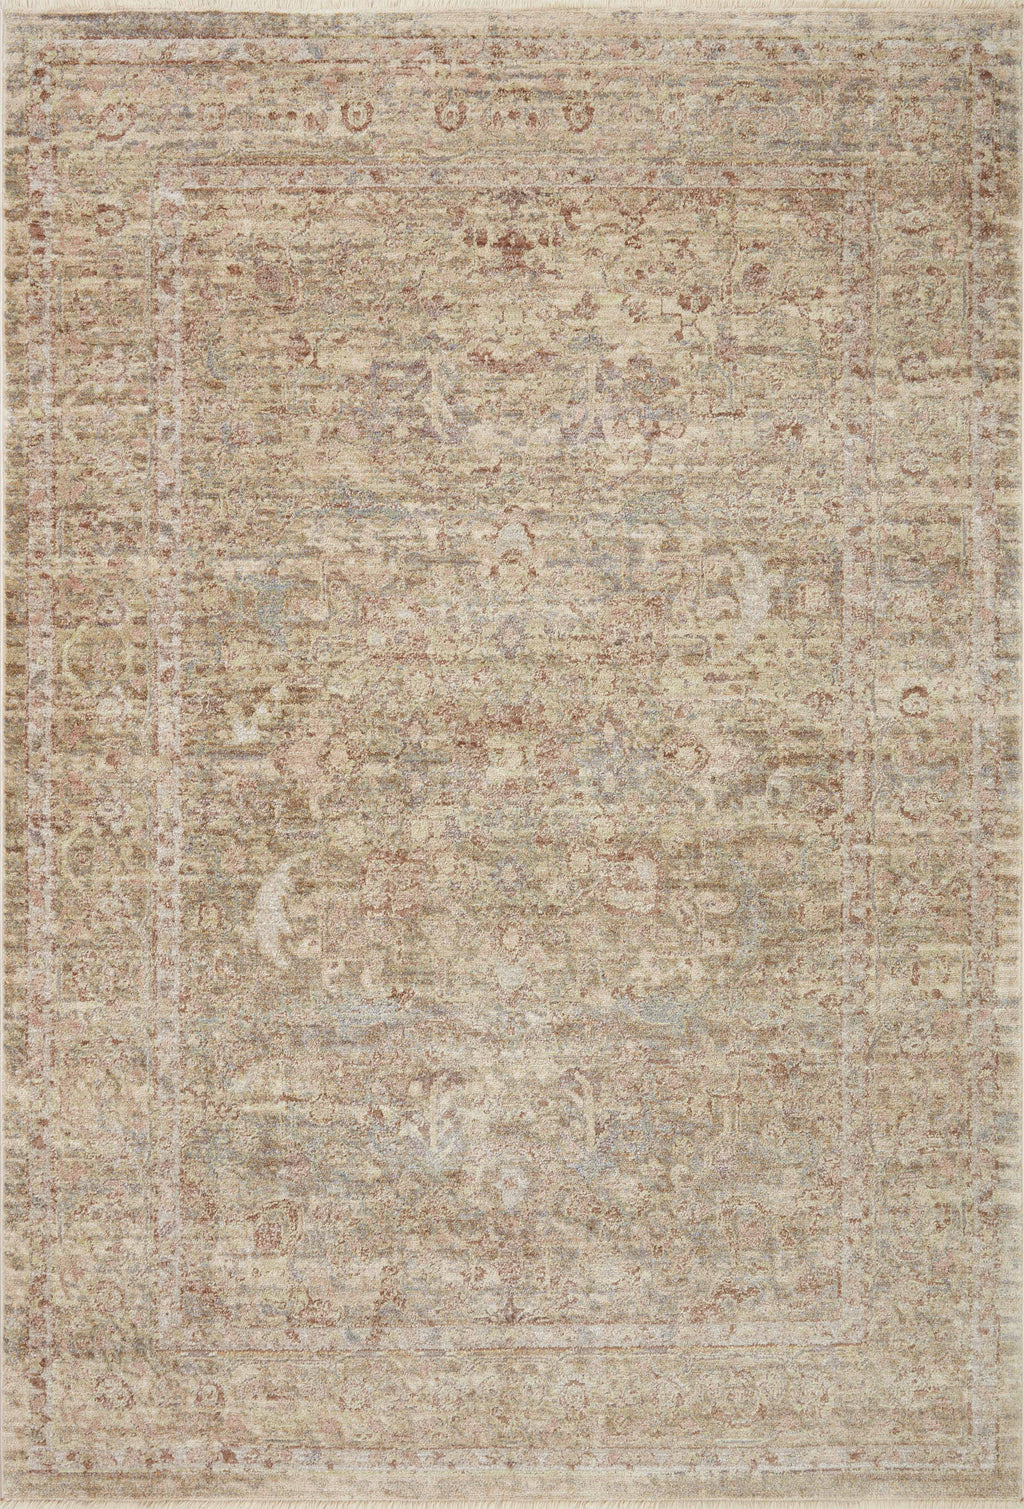 Sonnet Collection Rug in Moss / Natural Green sample Power-Loomed Polypropylene/Polyester